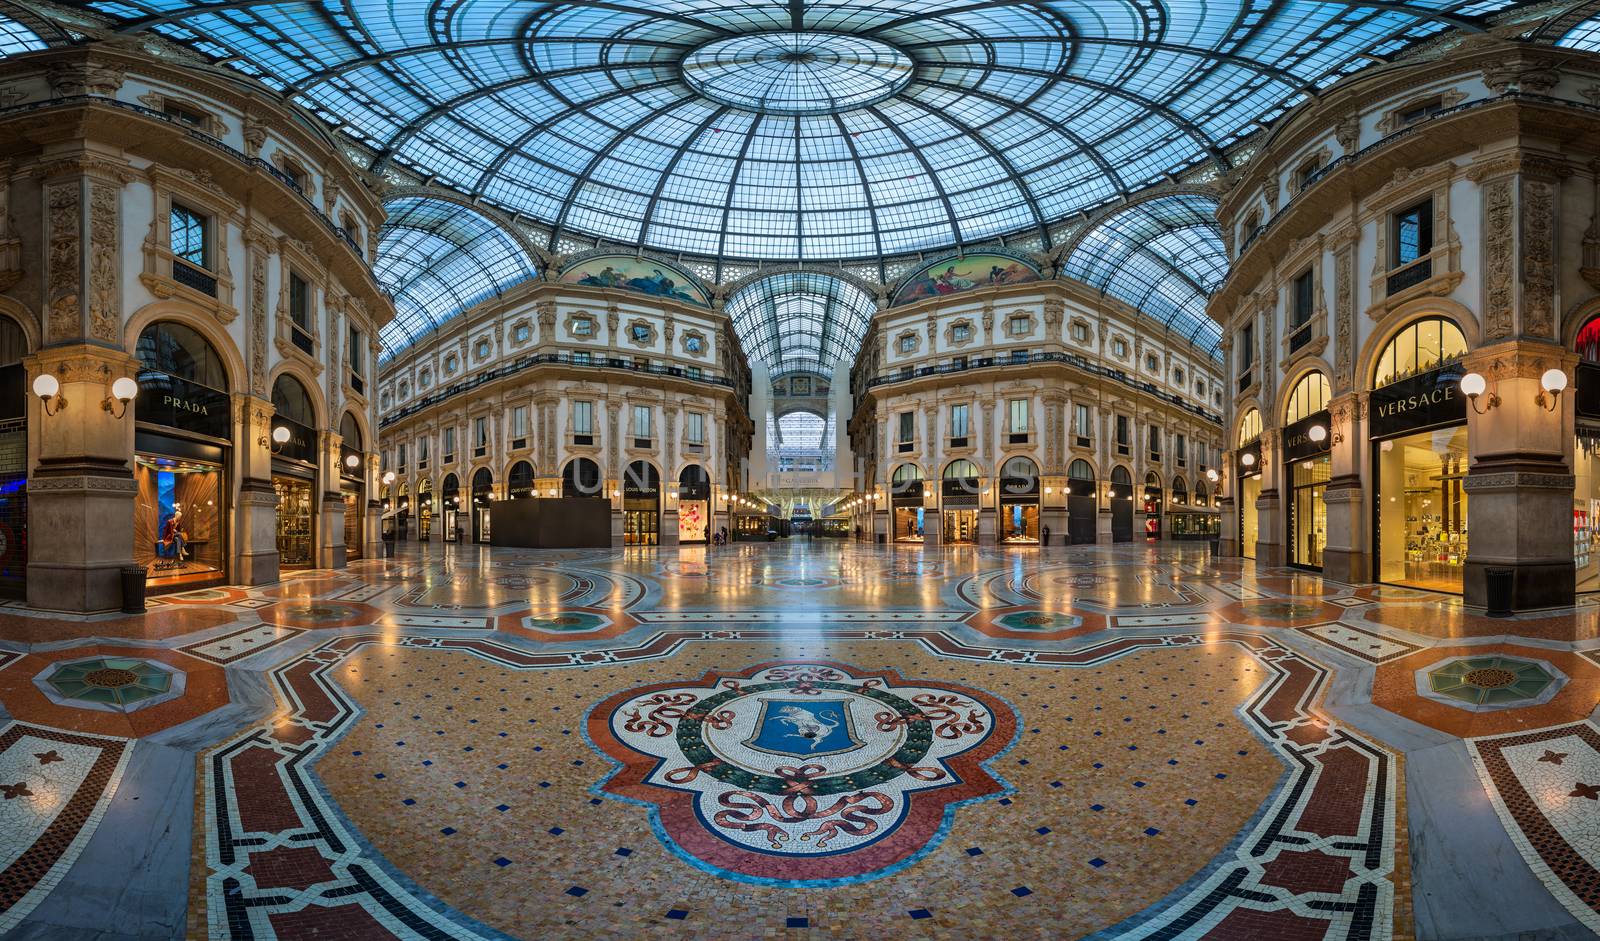 MILAN, ITALY - JANUARY 13, 2015:  Famous Bull Mosaic in Galleria Vittorio Emanuele II in Milan. It's one of the world's oldest shopping malls, designed and built by Giuseppe Mengoni between 1865 and 1877.